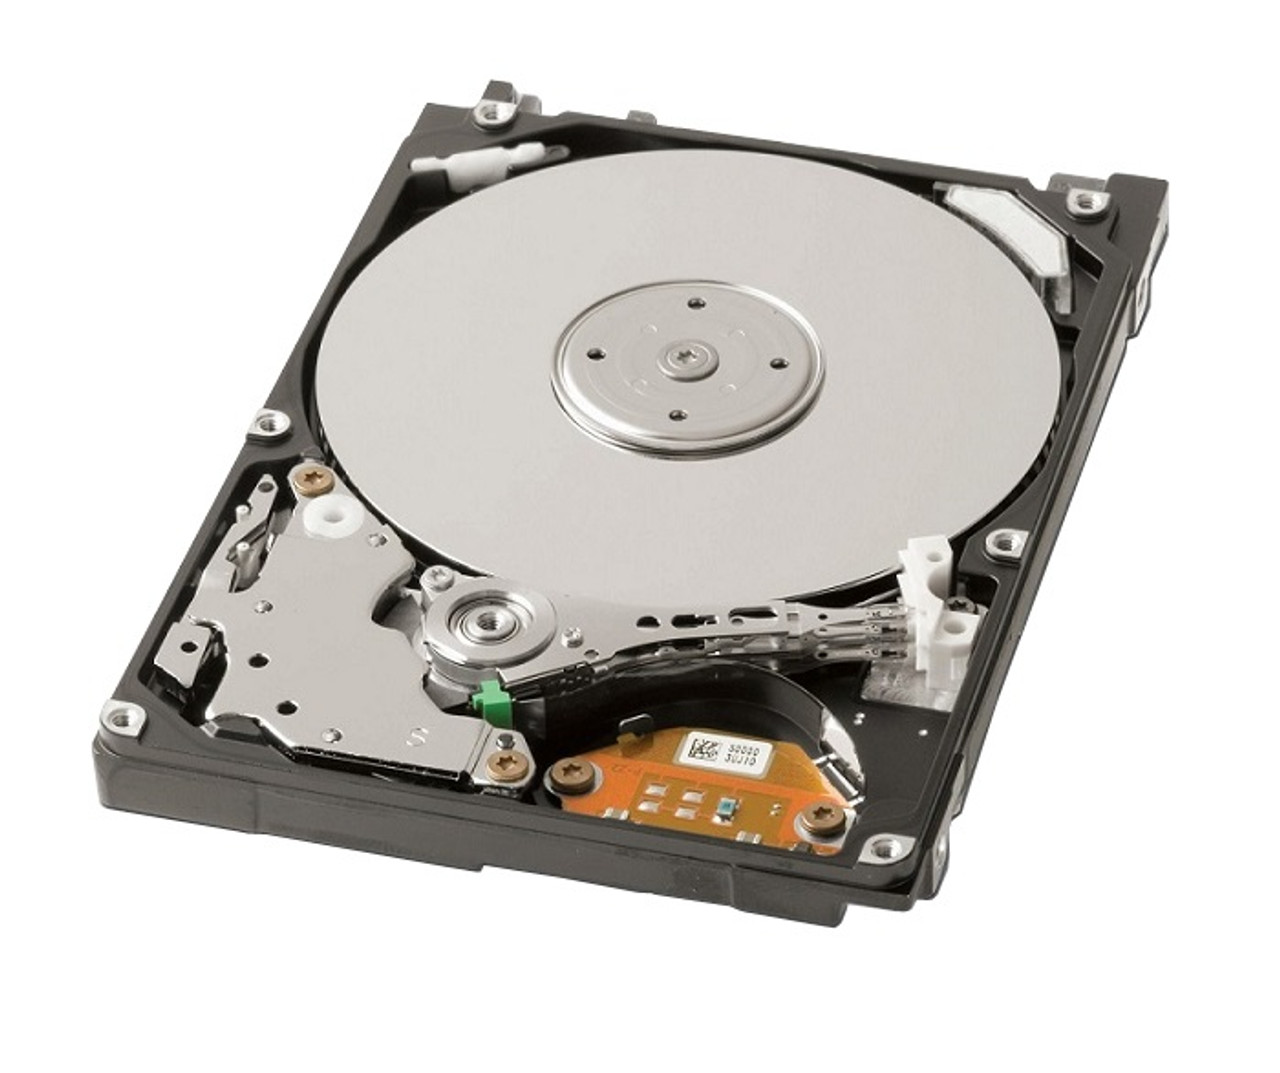 HDD2D08A - Toshiba 100GB 5400RPM IDE ATA-100 8MB Cache 9.5mm 2.5-Inch Laptop Hard Drive